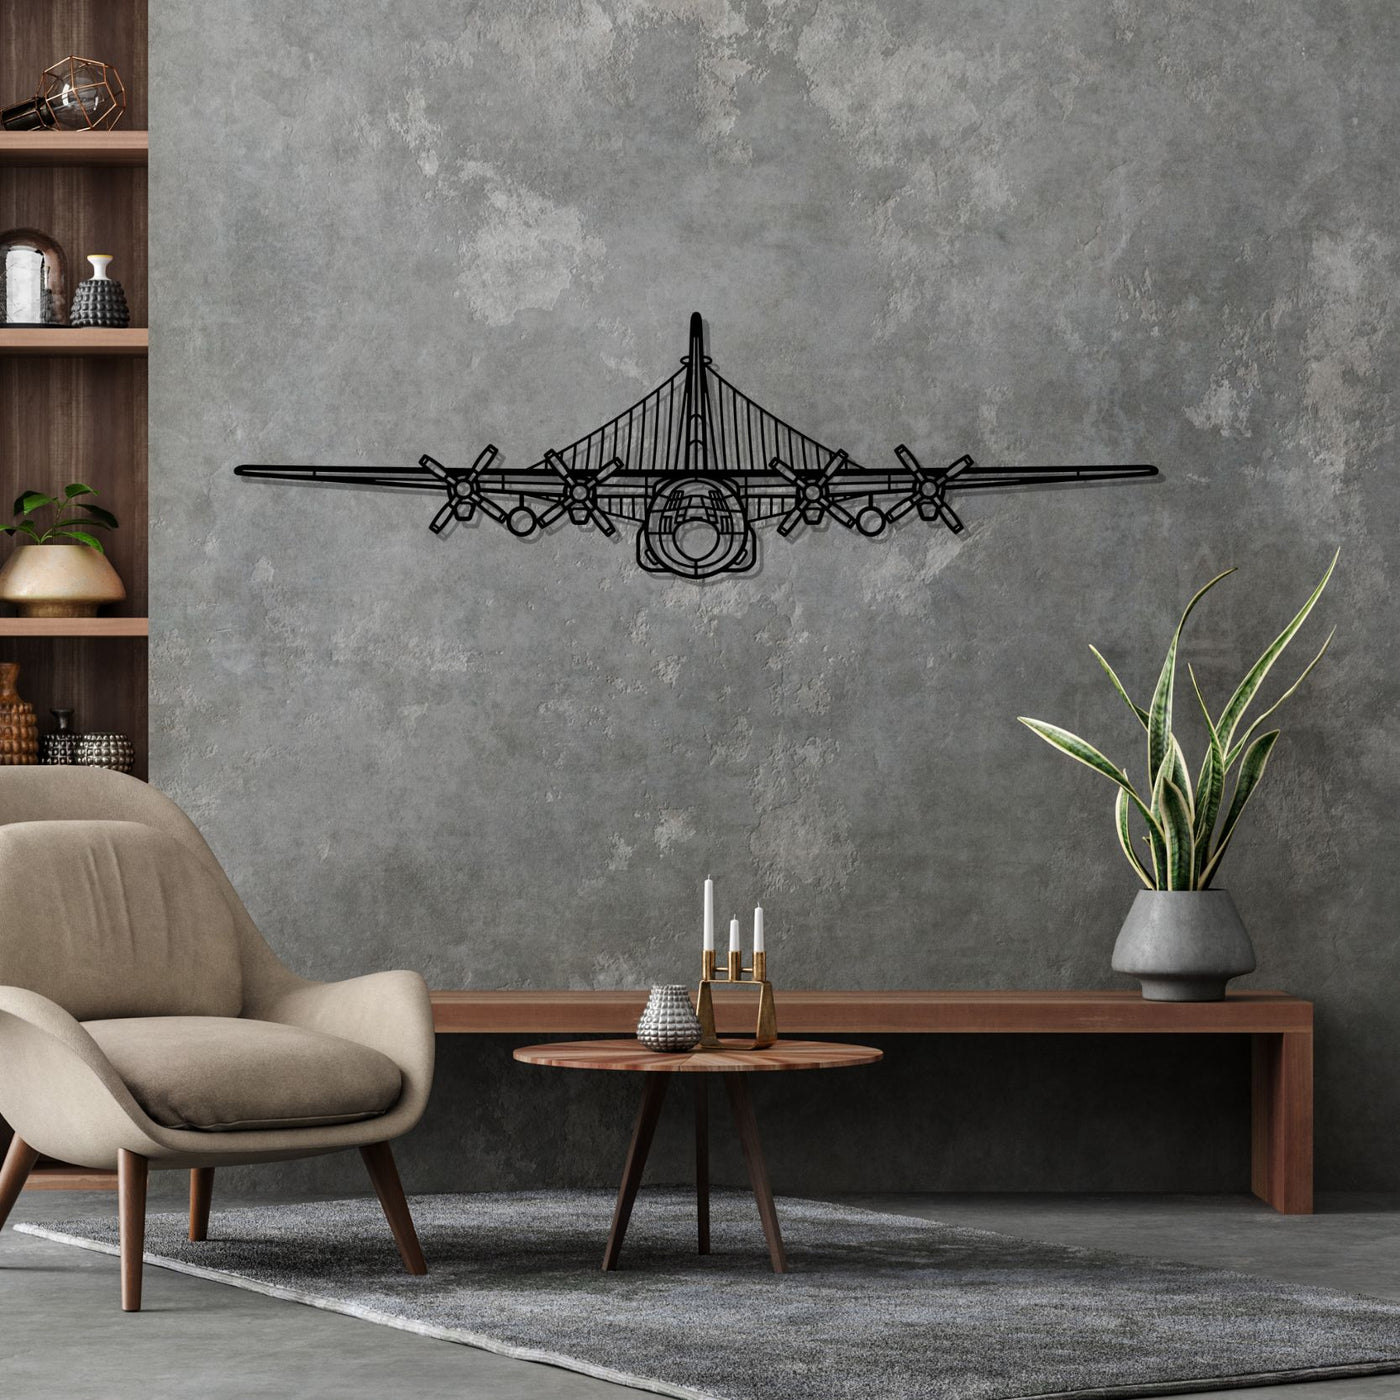 EC-130H Compass Call Front Silhouette Metal Wall Art